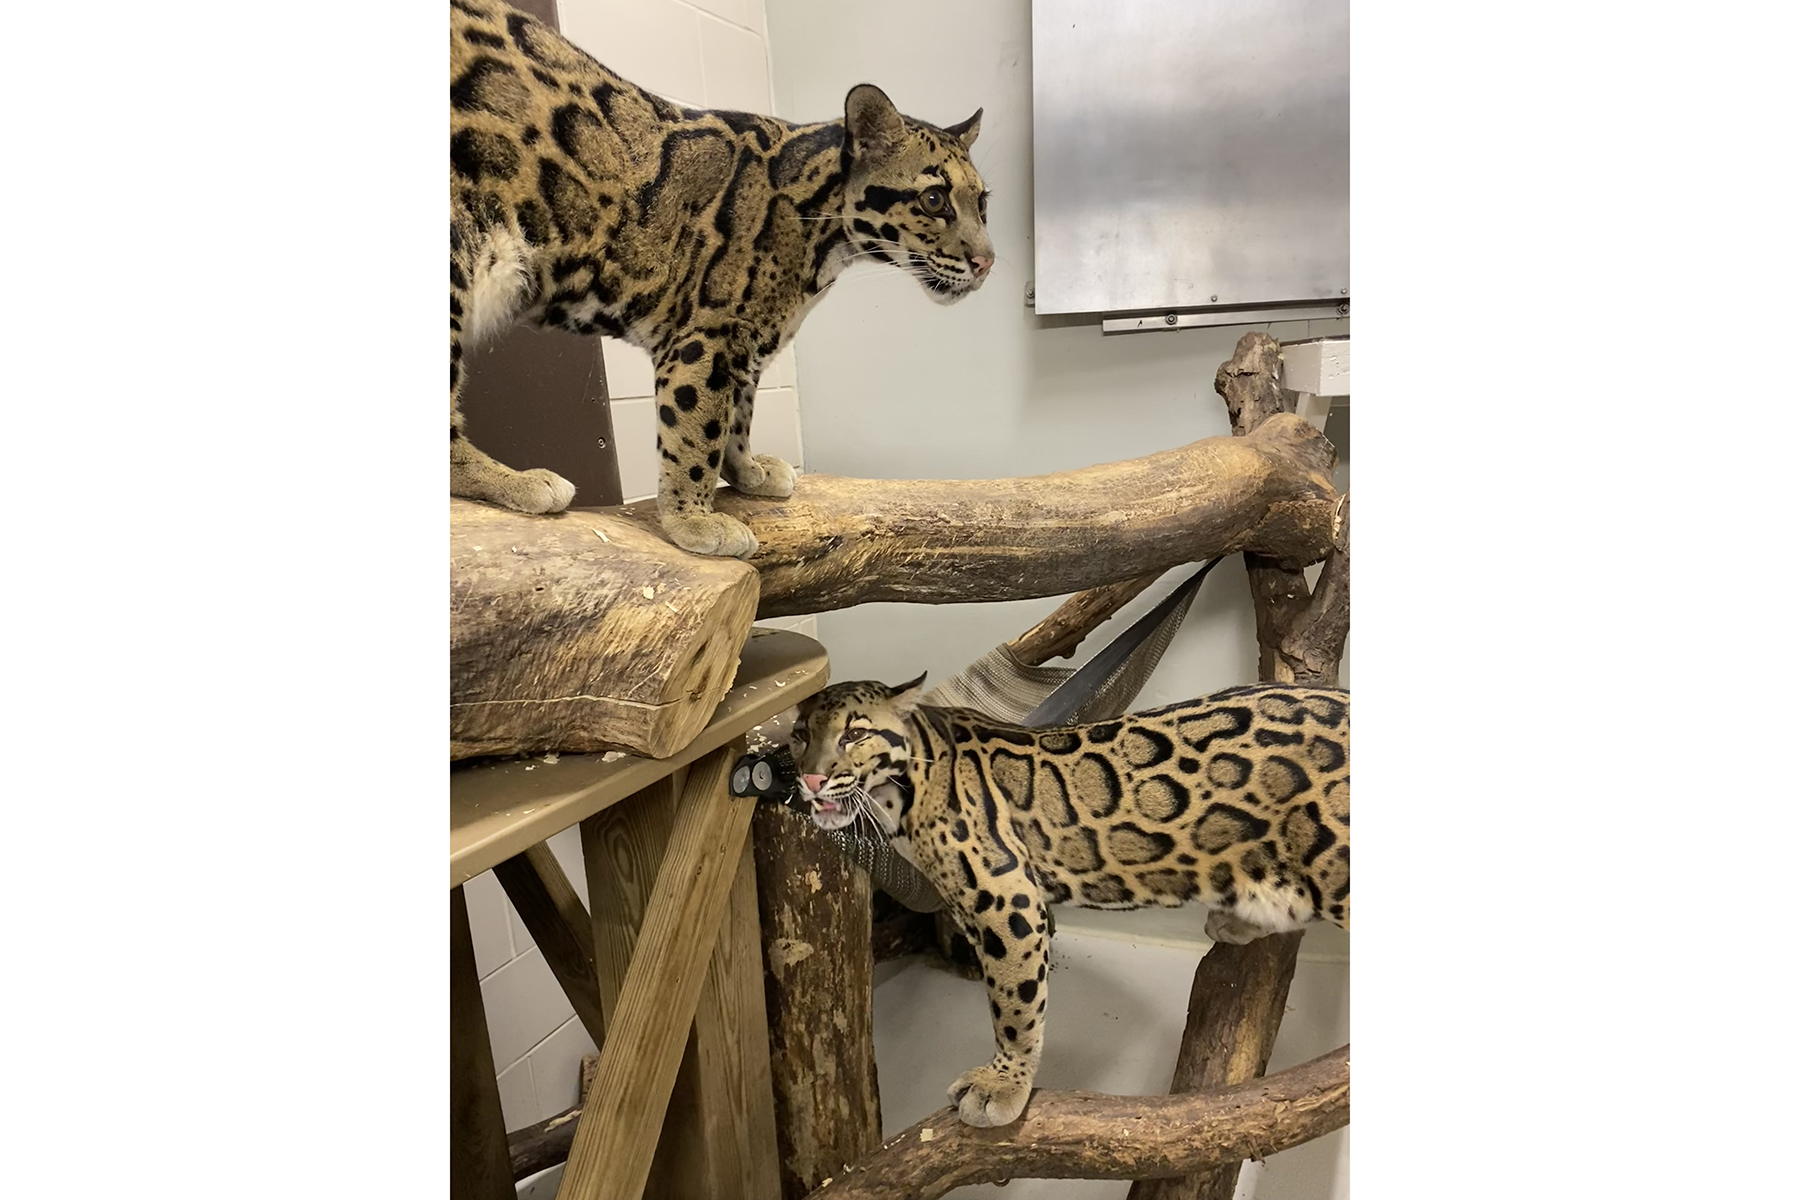 Clouded leopard Jilian and Paitoon play on the climbing structure in their indoor enclosure.